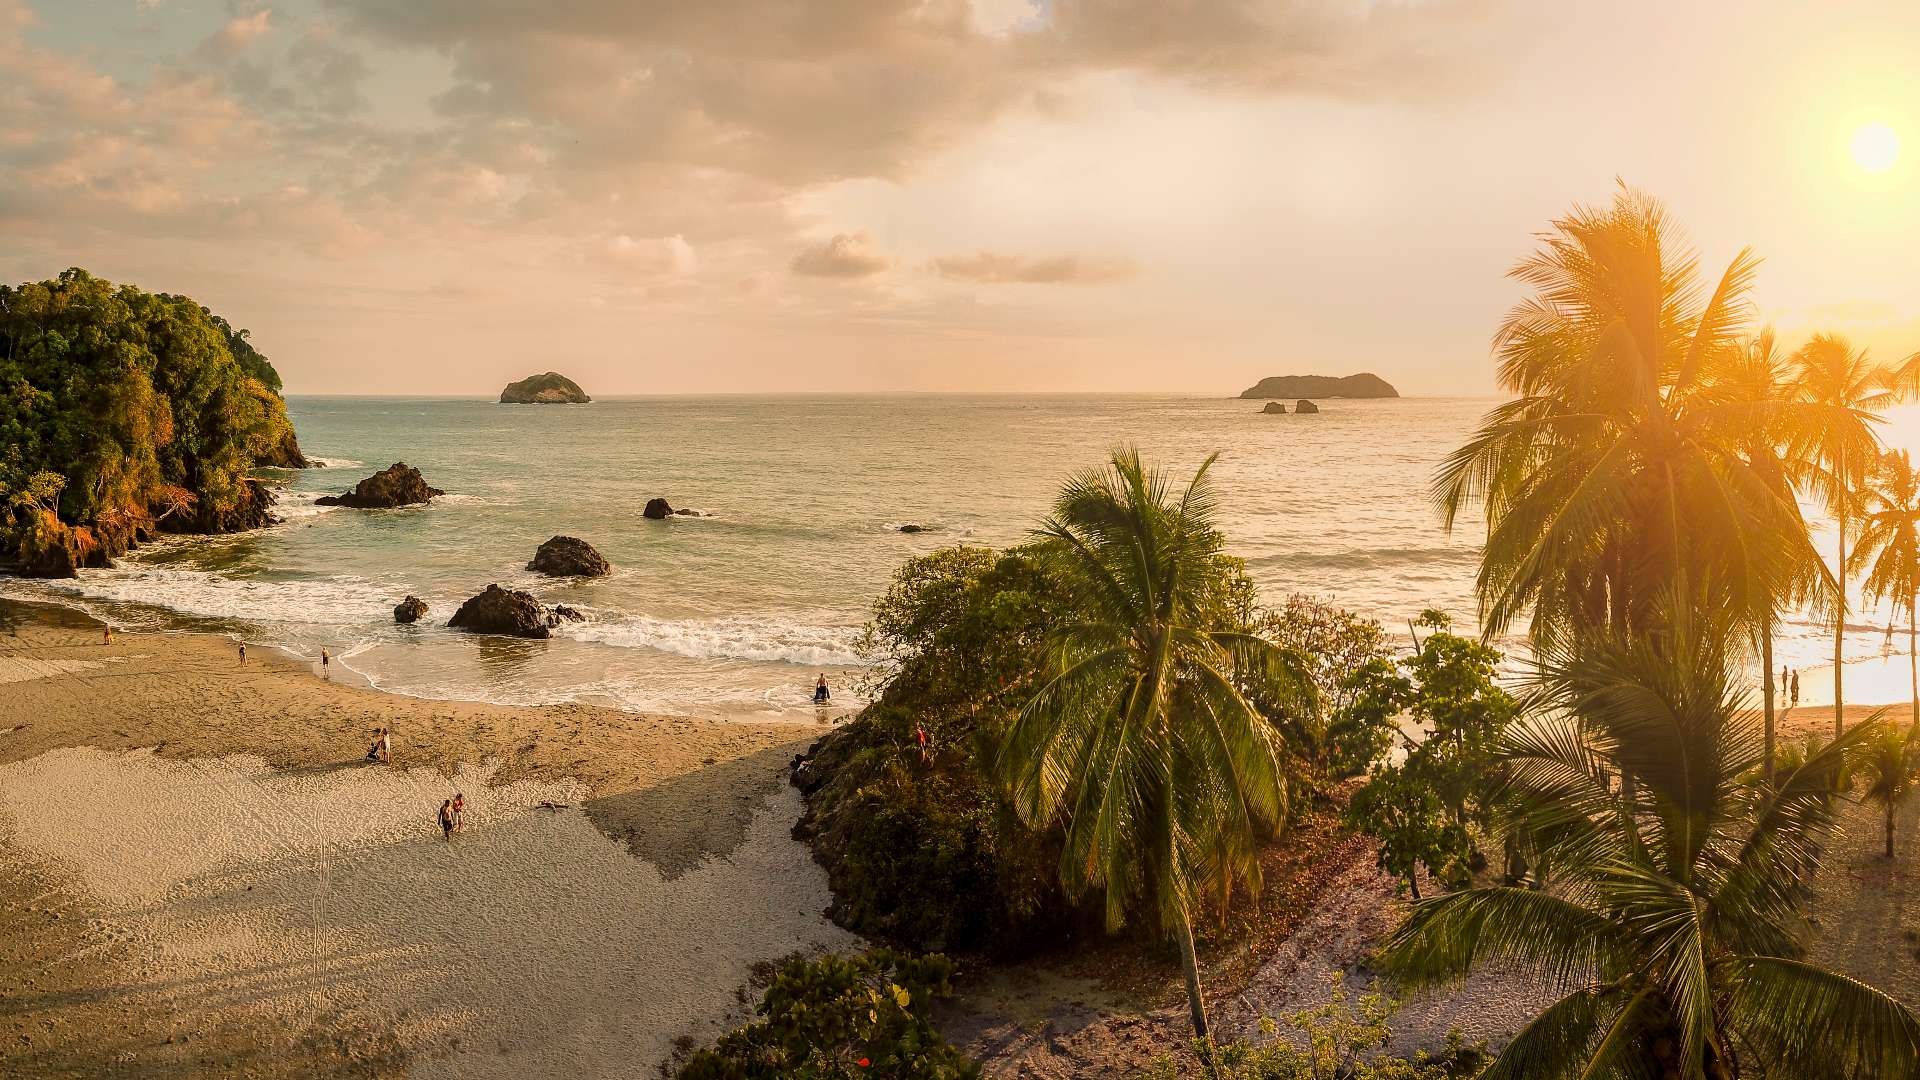 Costa Rica’s 10 Most Popular Places